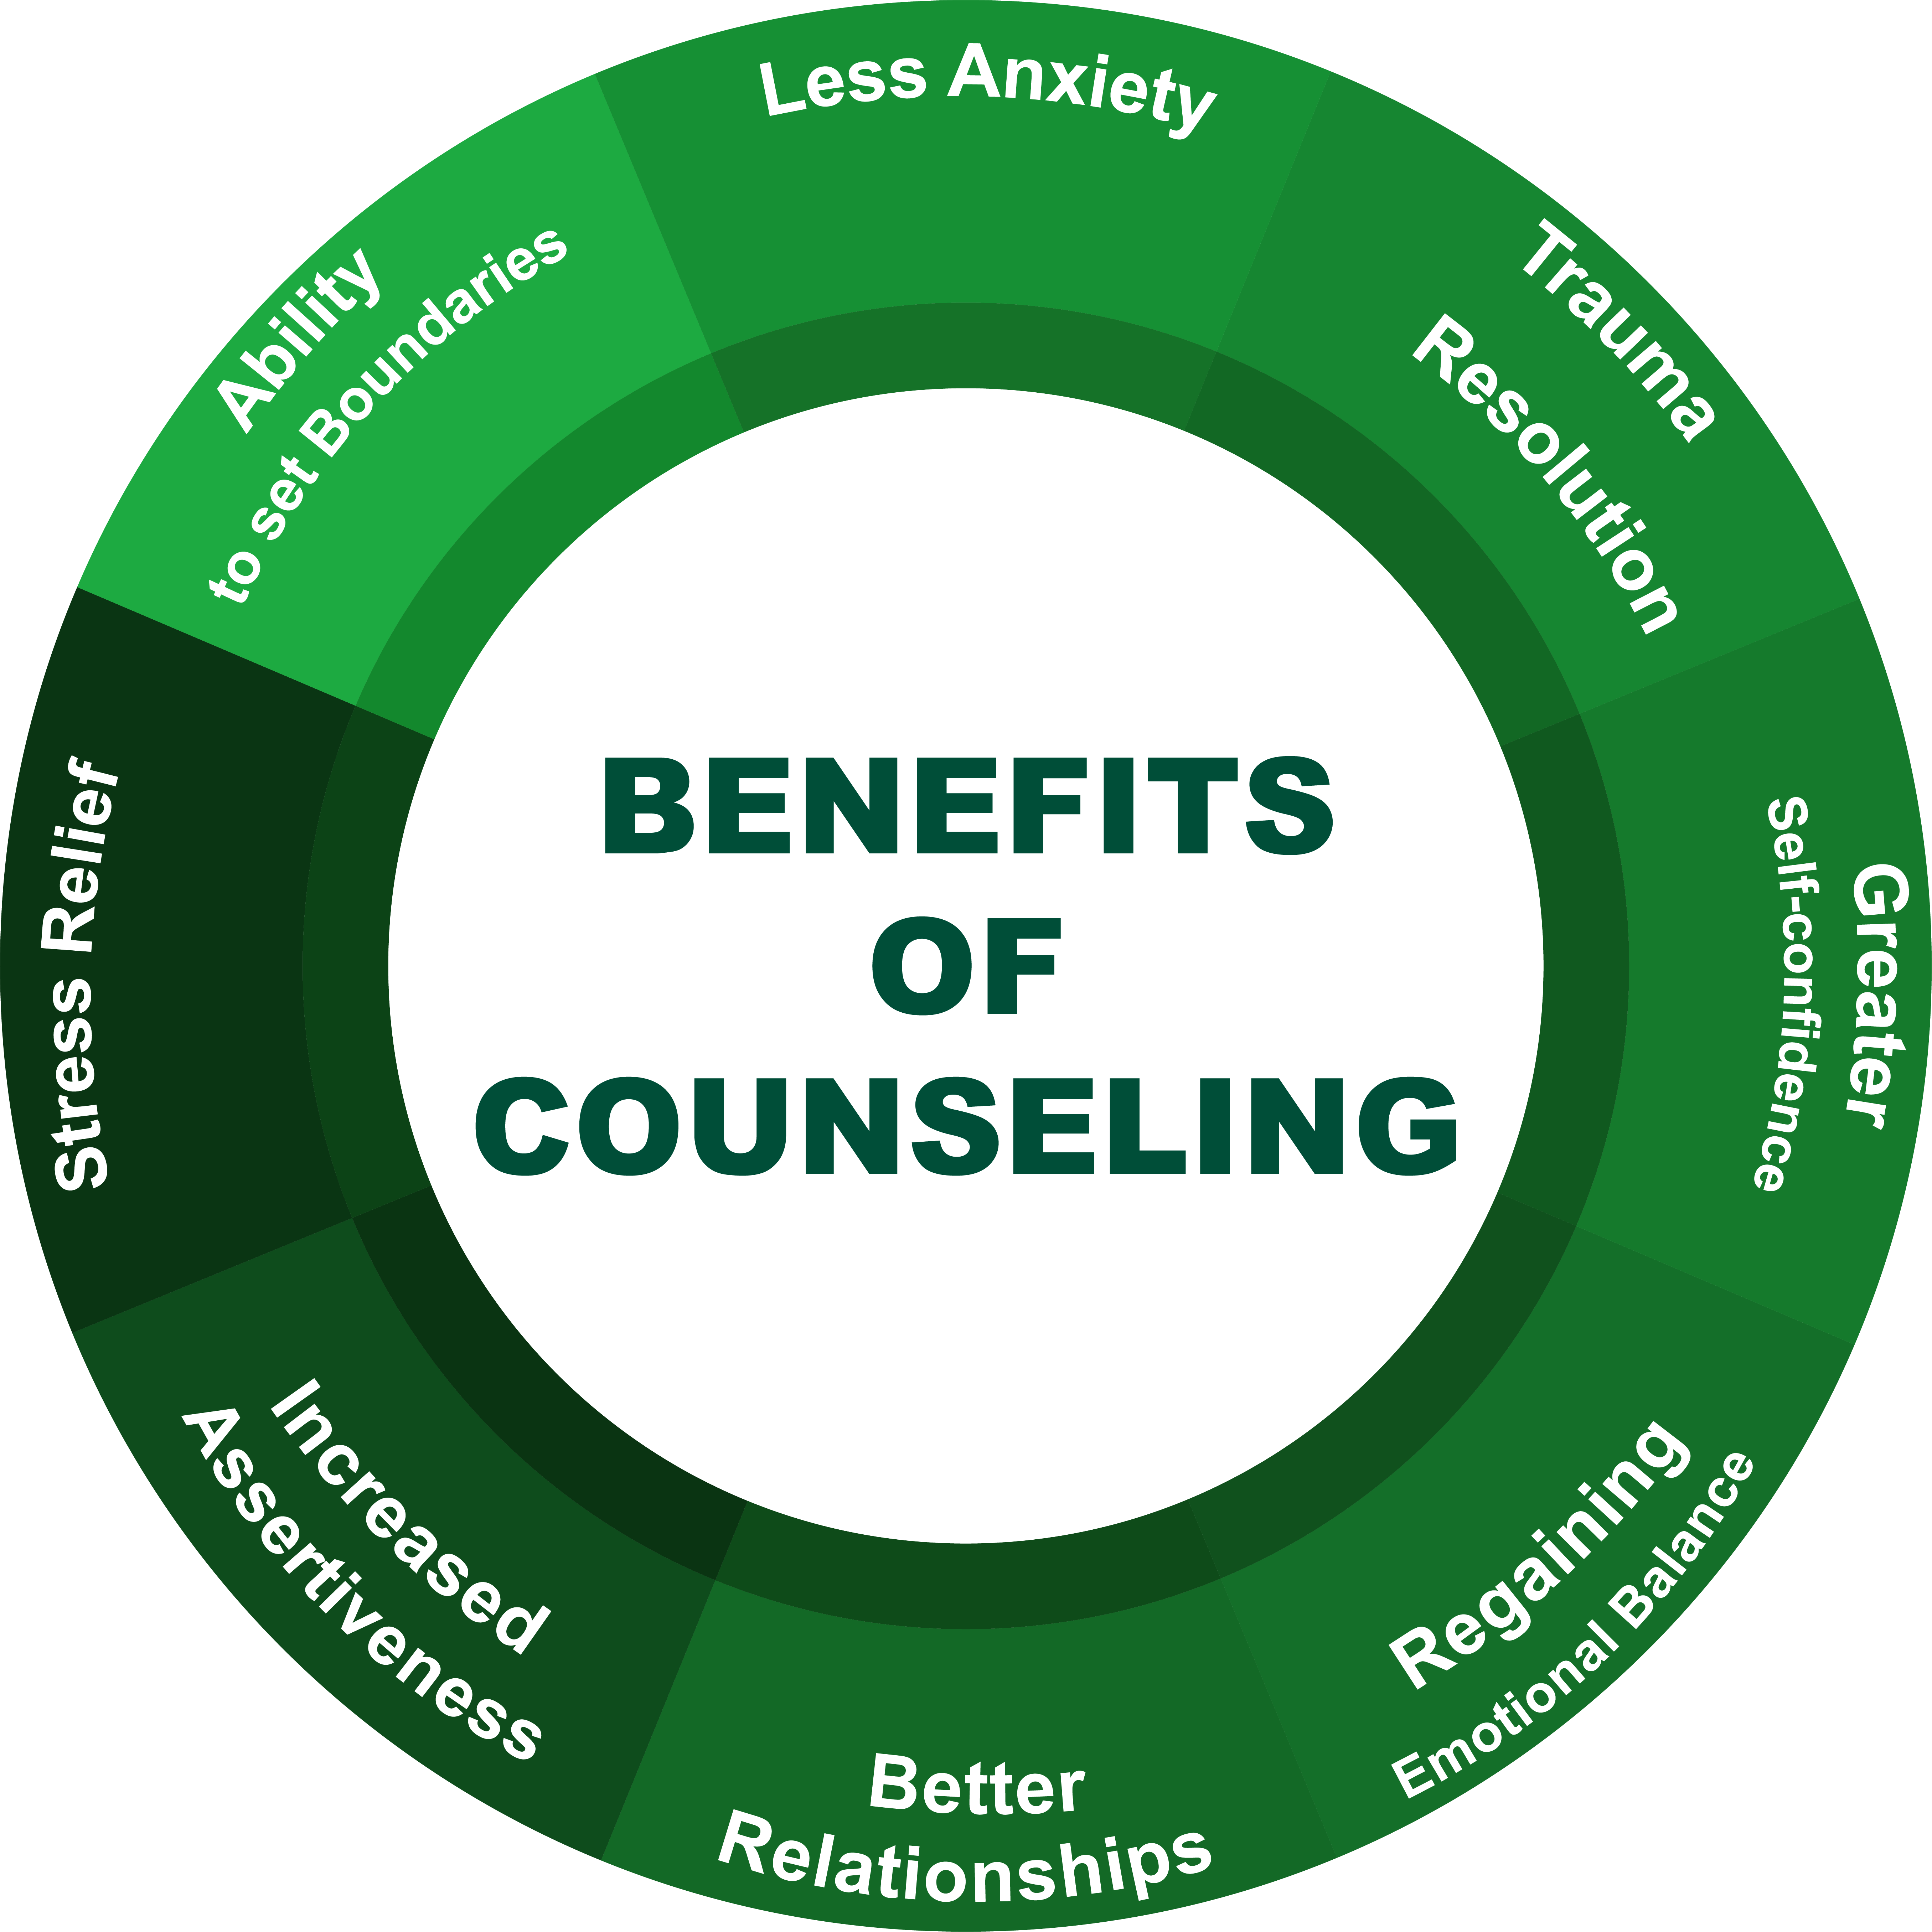 counseling benefits diagram